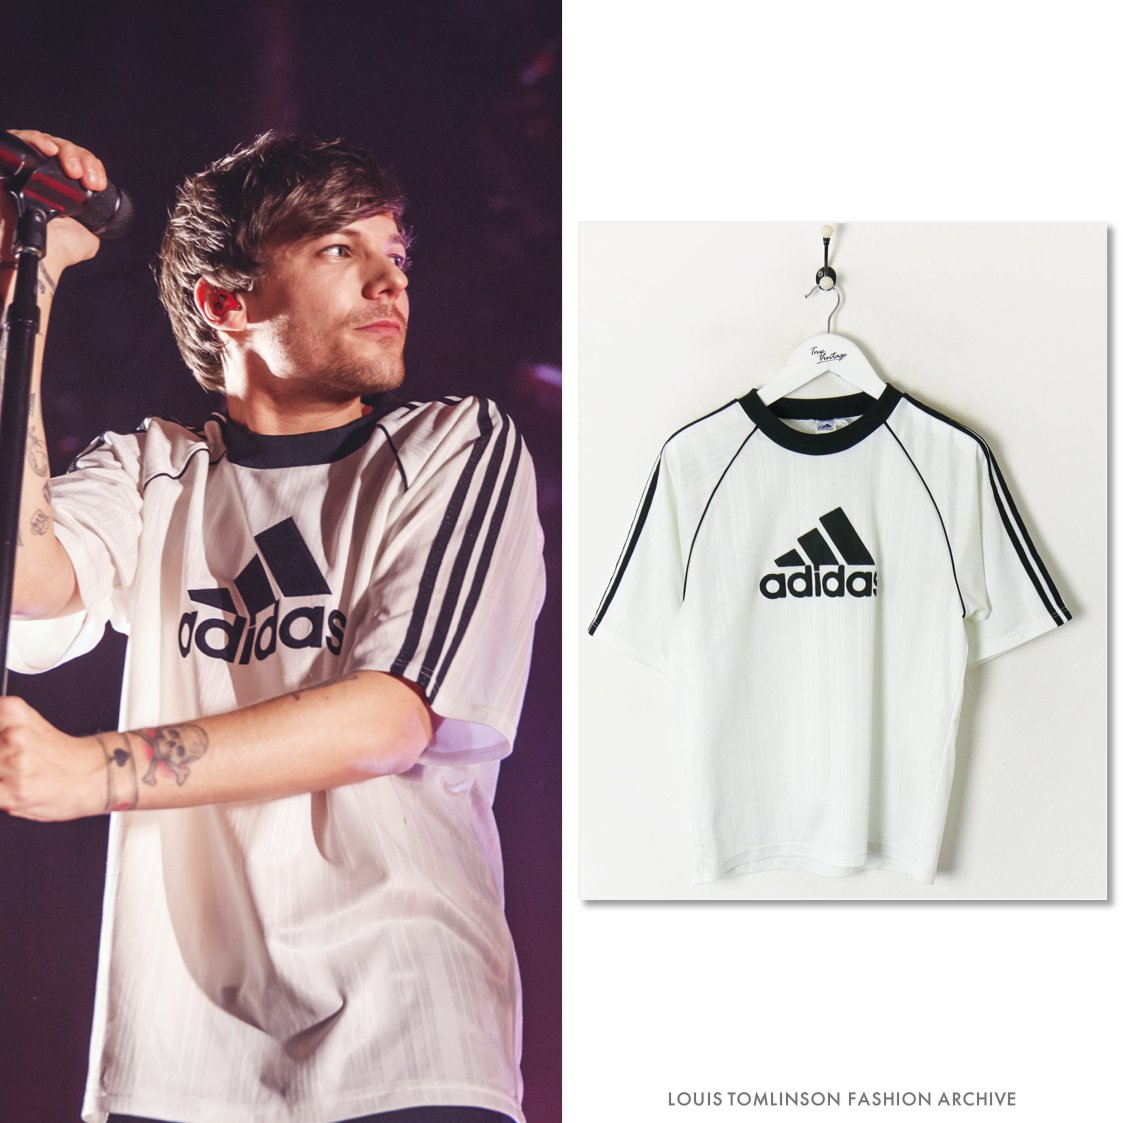 Louis Tomlinson Fashion Archive on Twitter: \